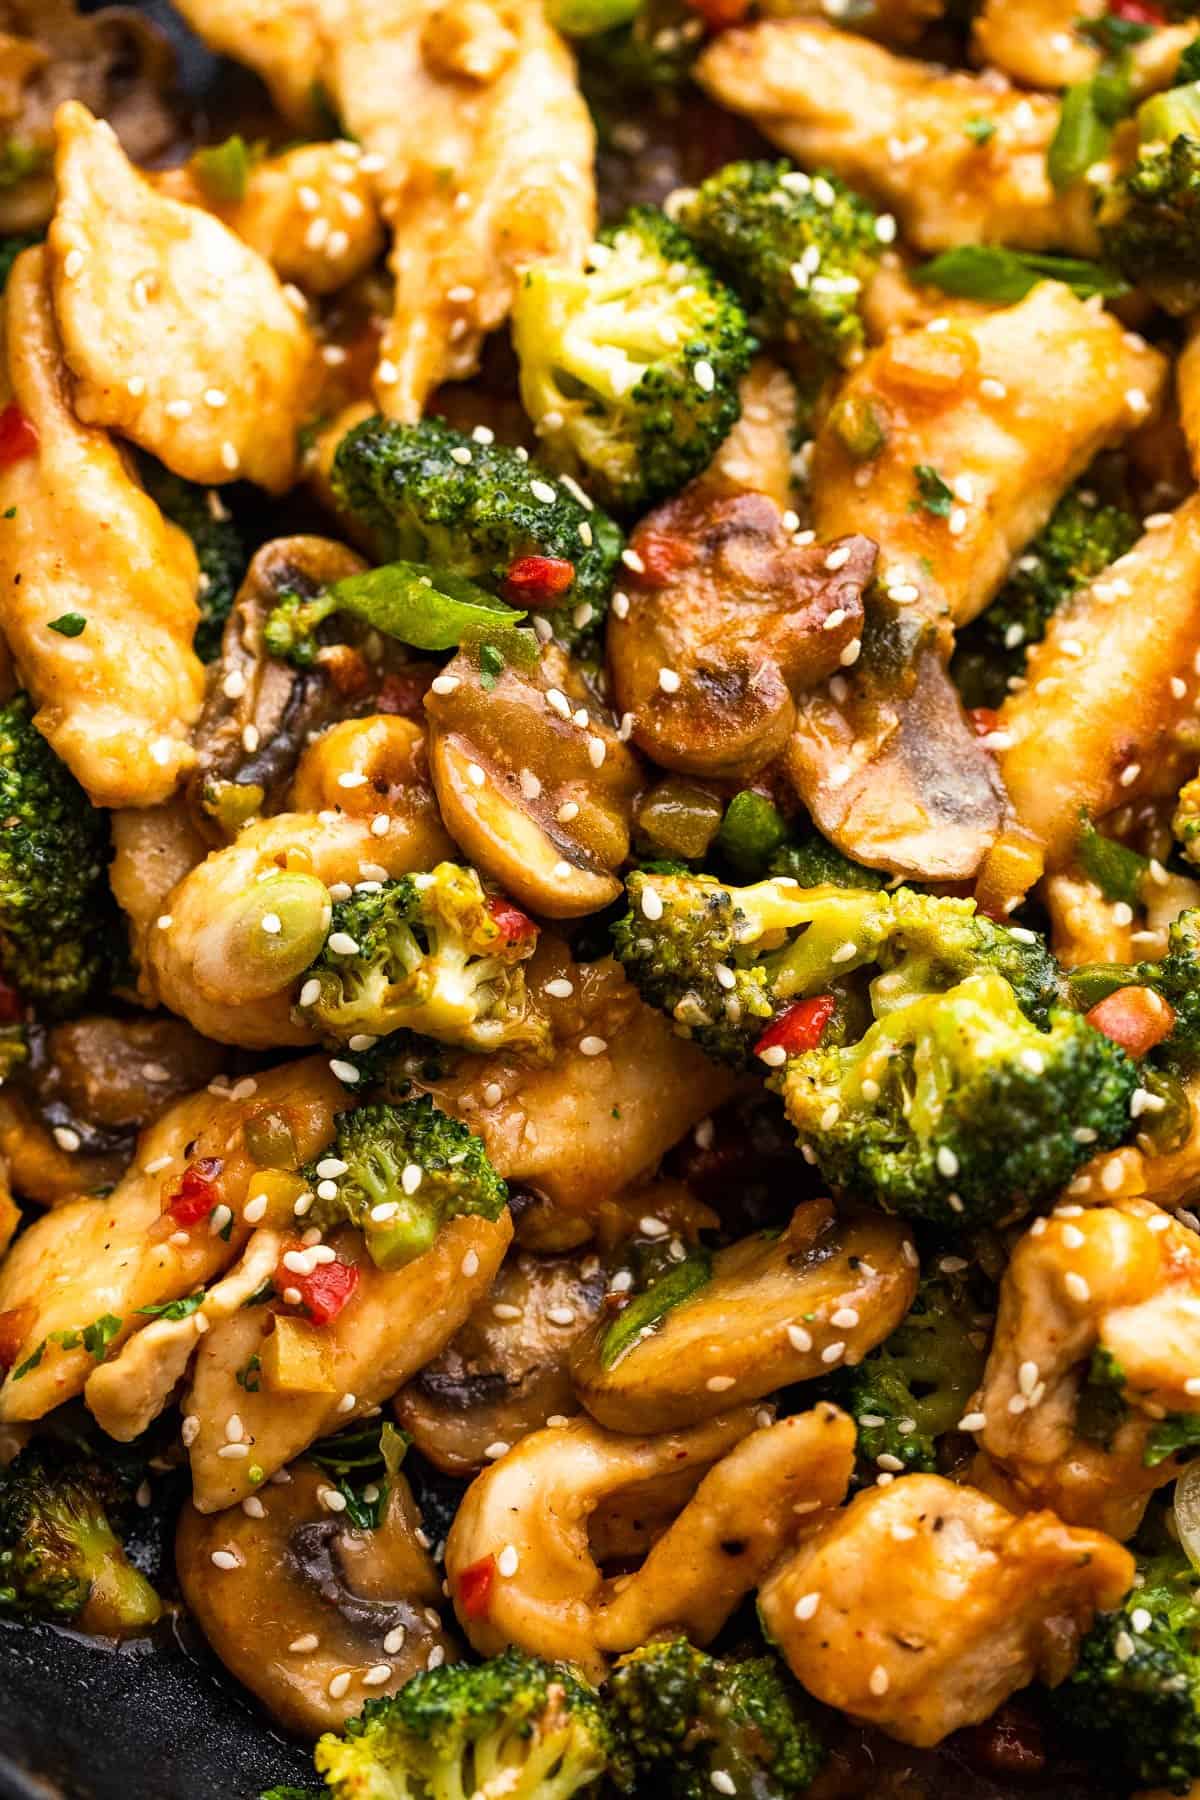 up close shot of mushrooms, chicken pieces, and broccoli